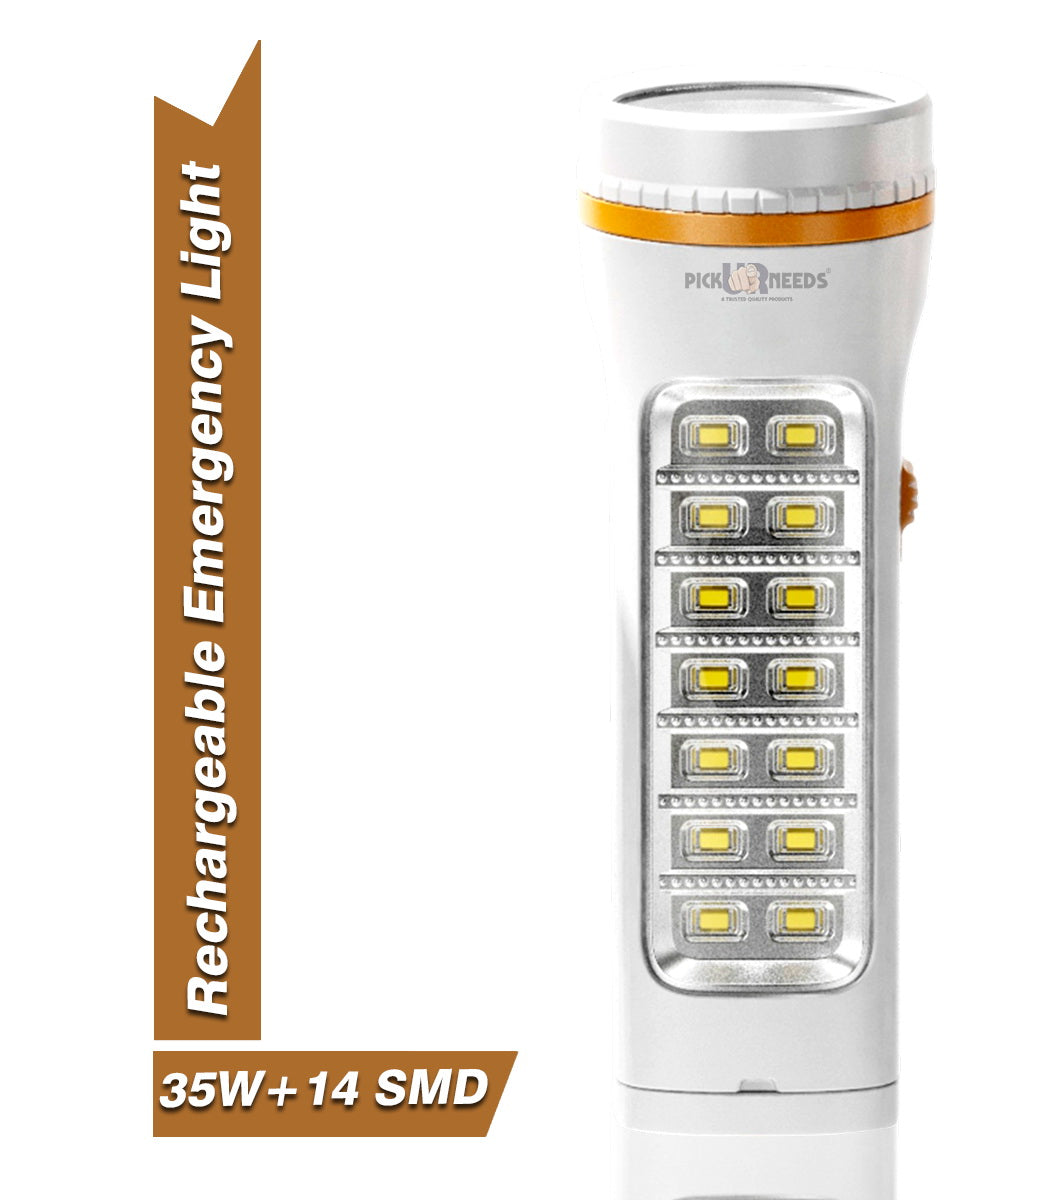 Pick Ur Needs Rechargeable 25W+10 SMD Emergency Long Range LED Torch Light With Slide charging 8 hrs Torch Emergency Light